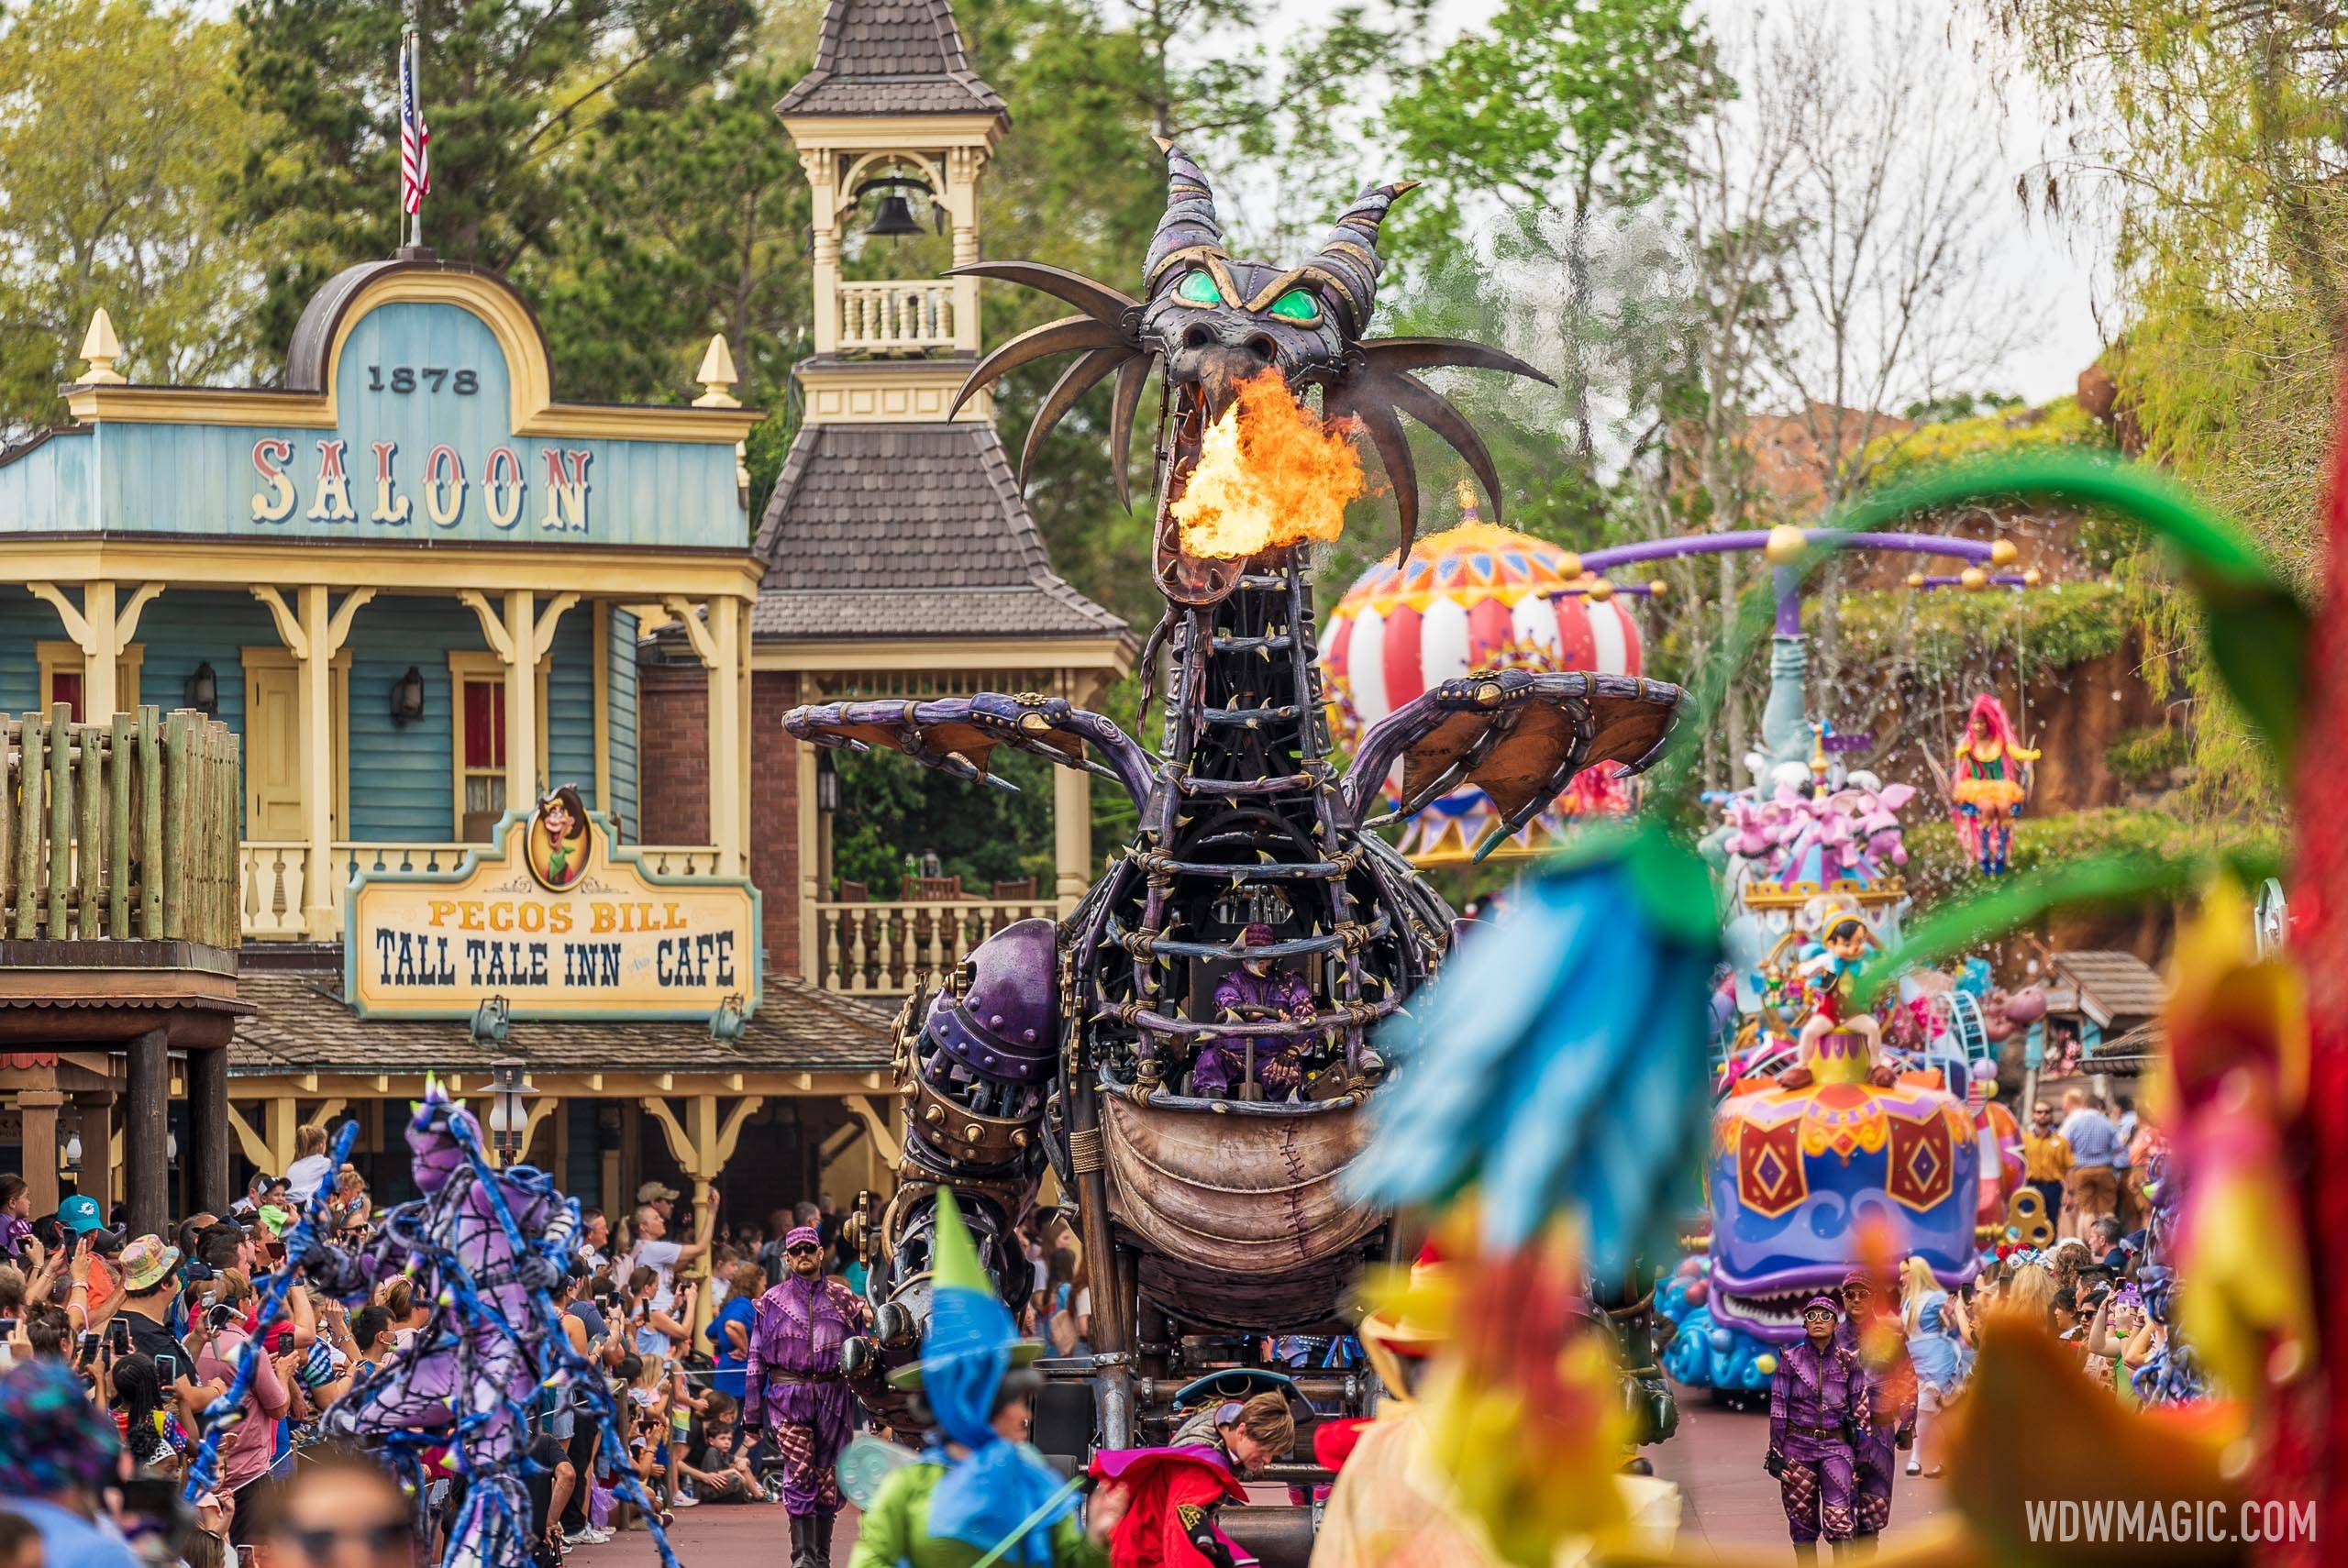 Disney Festival of Fantasy Parade returns to two performances per day on select days in November